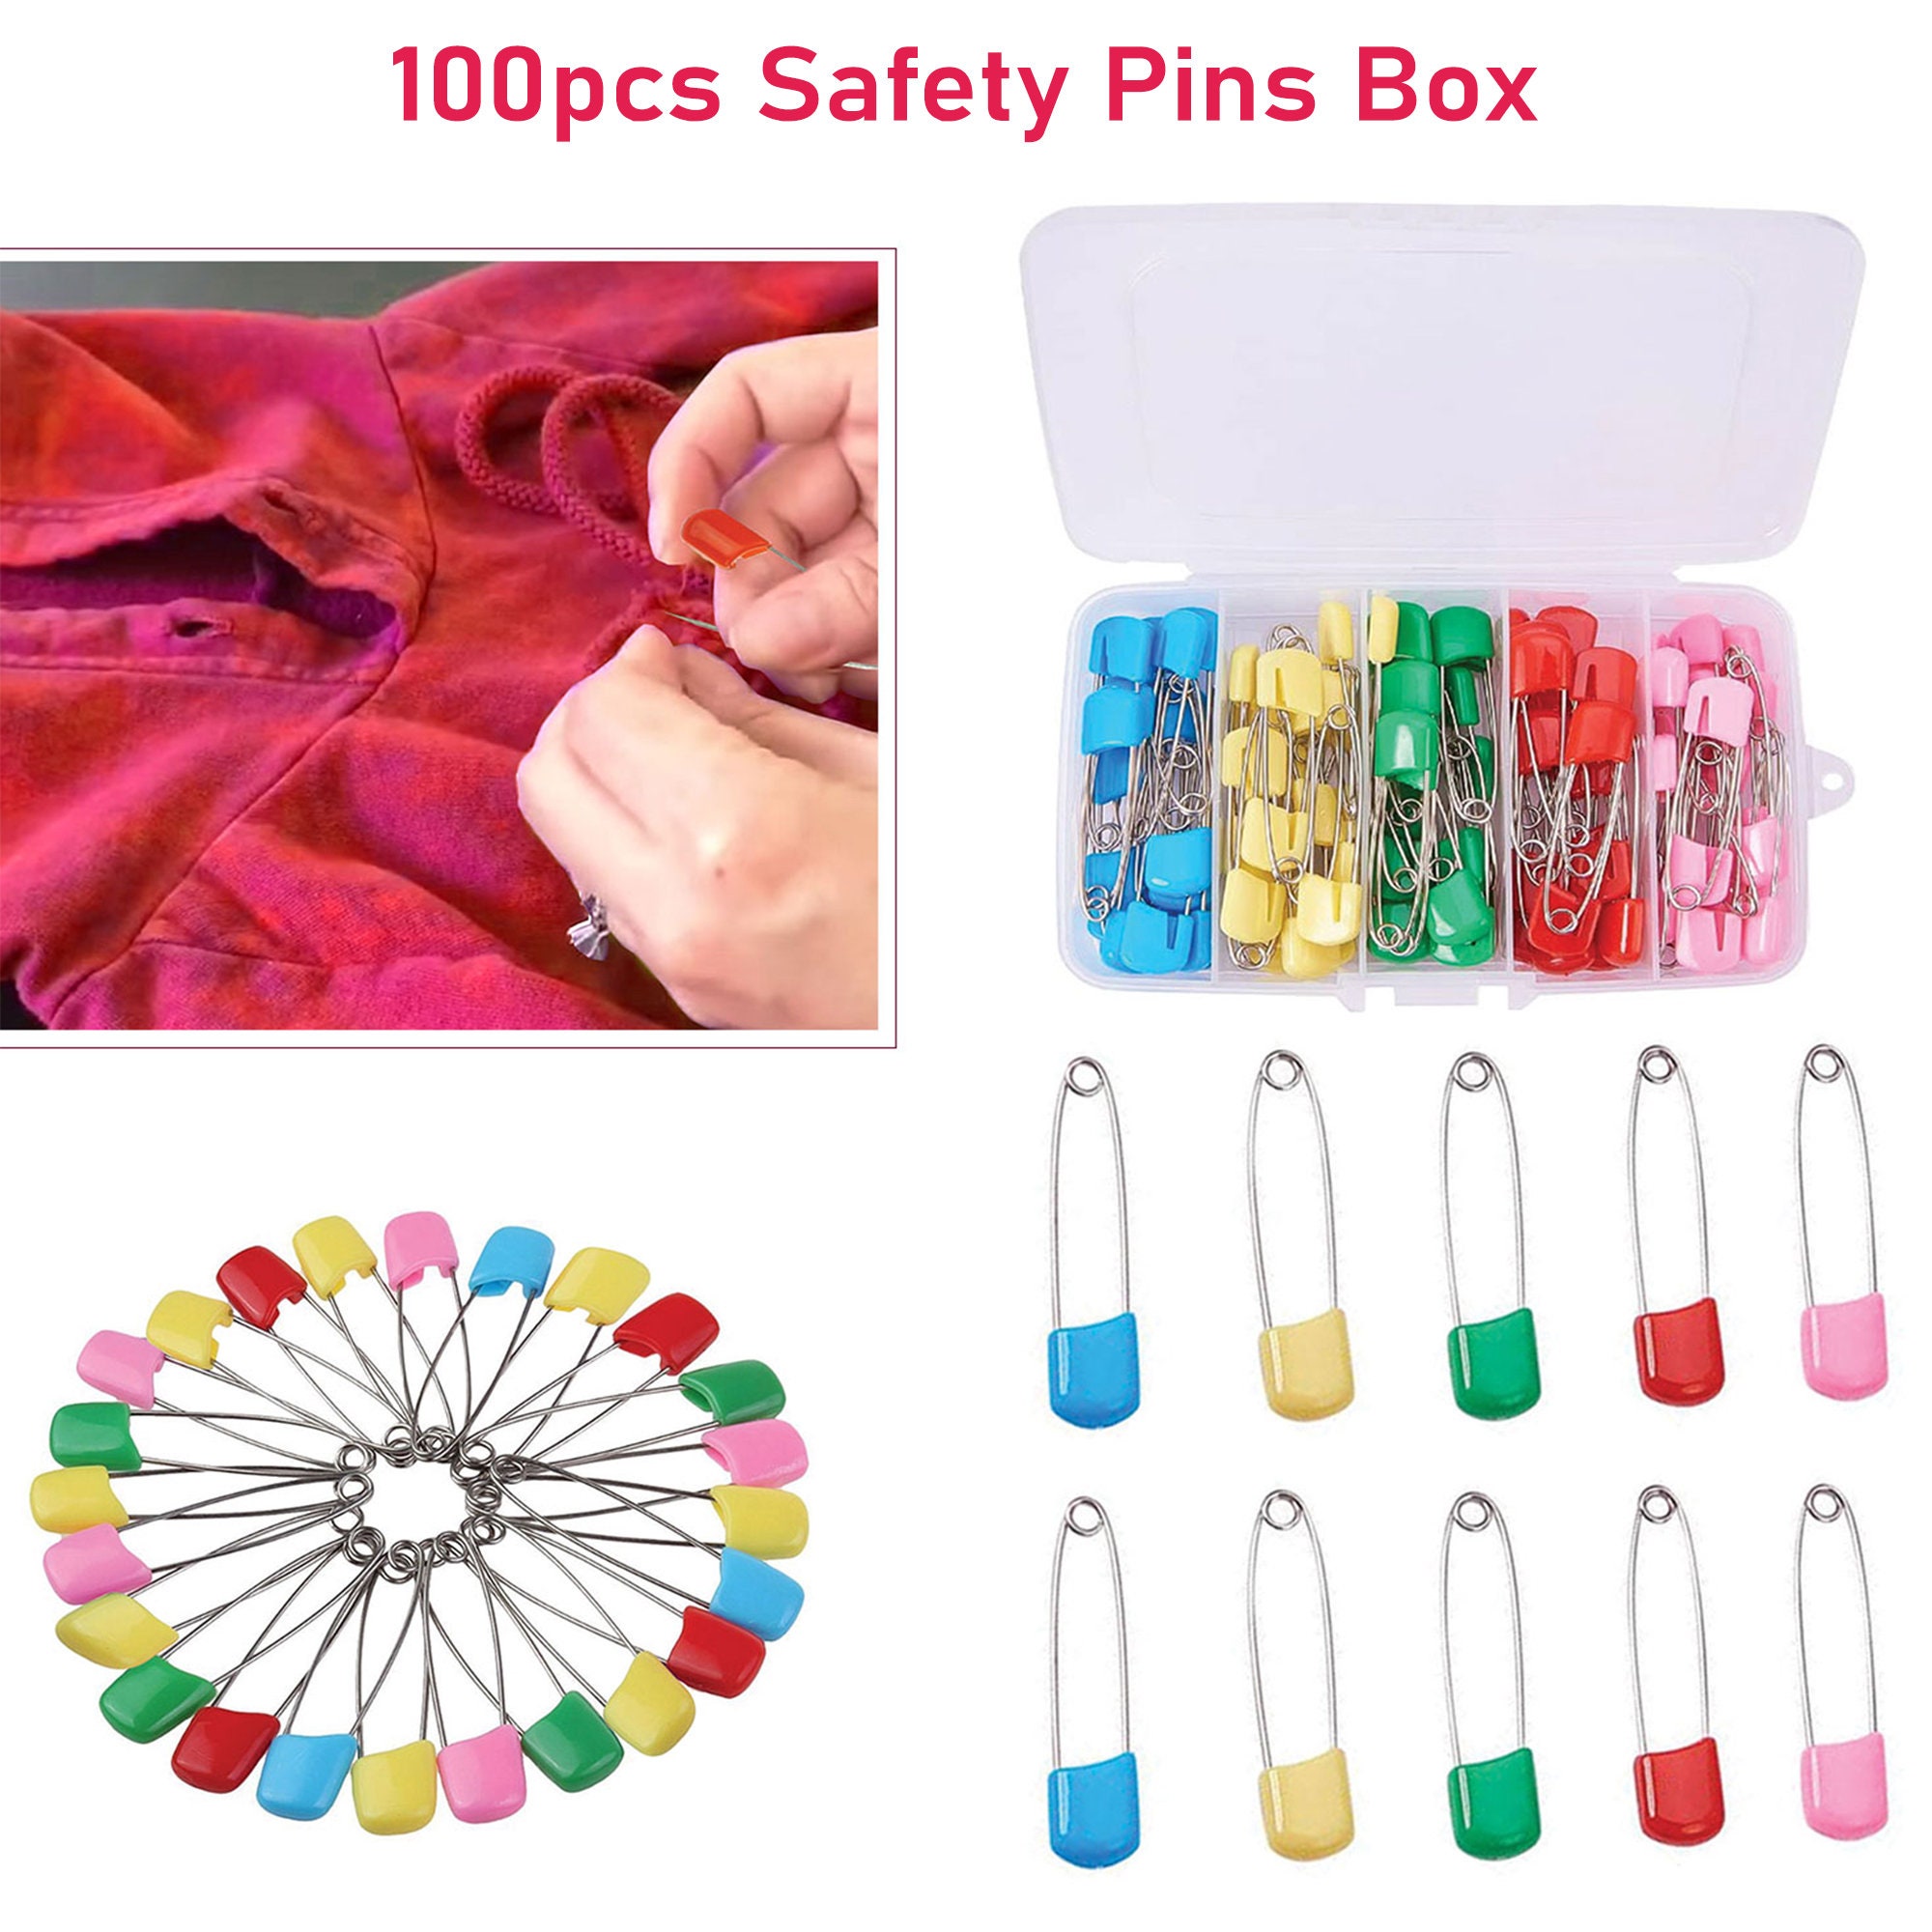 260pcs/box Safety Pins With Different Sizes, Nickle Plated Steel Wire Bulk  Pins For Clothes, Sewing, Art & Craft